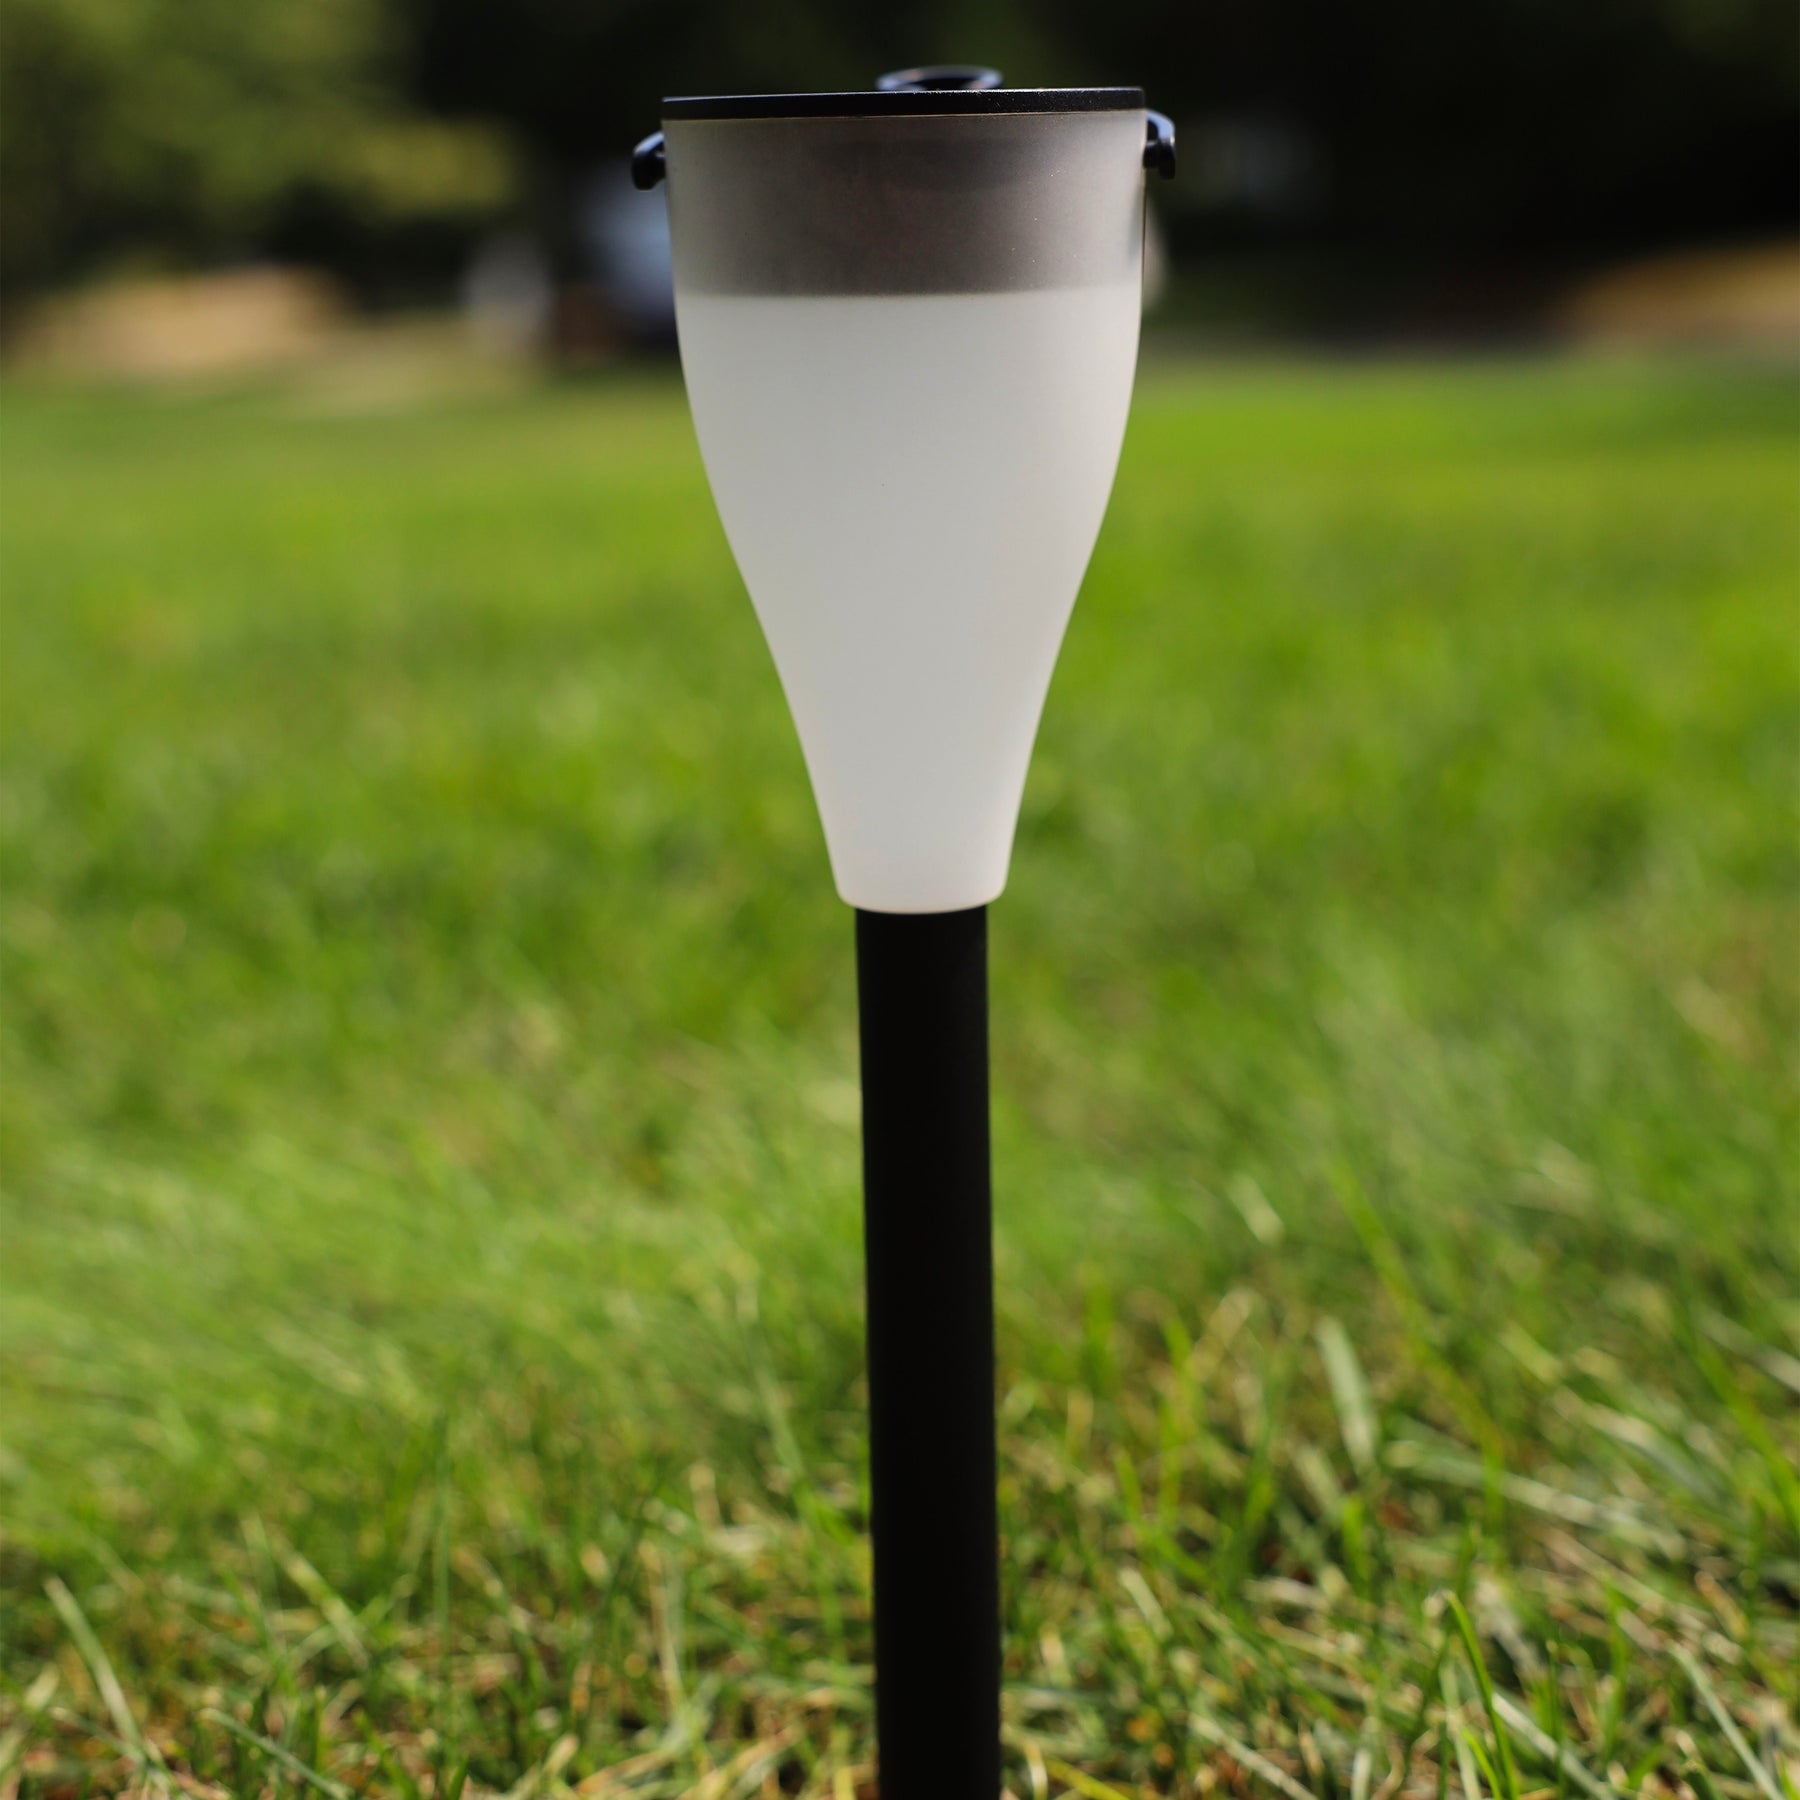 Solar LED light staked in the grass.